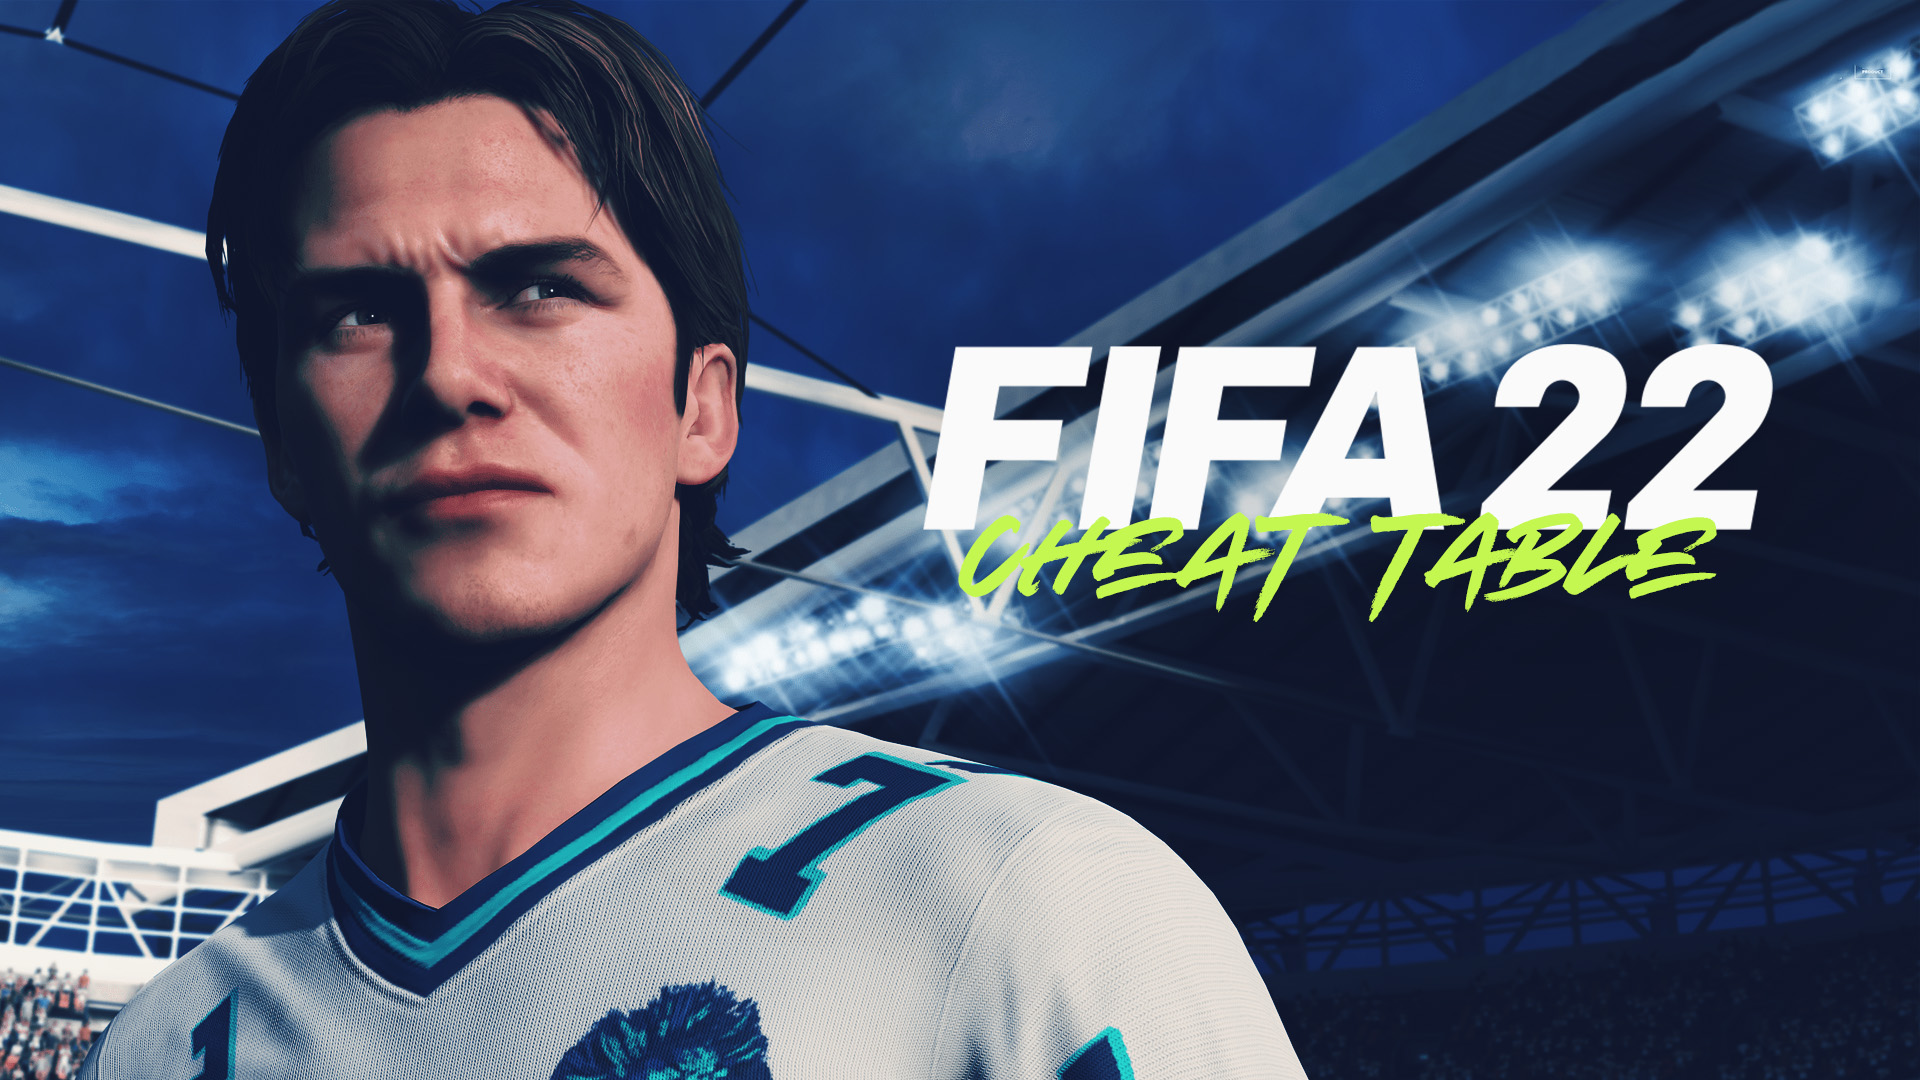 FIFA 22 - Page 5 - FearLess Cheat Engine